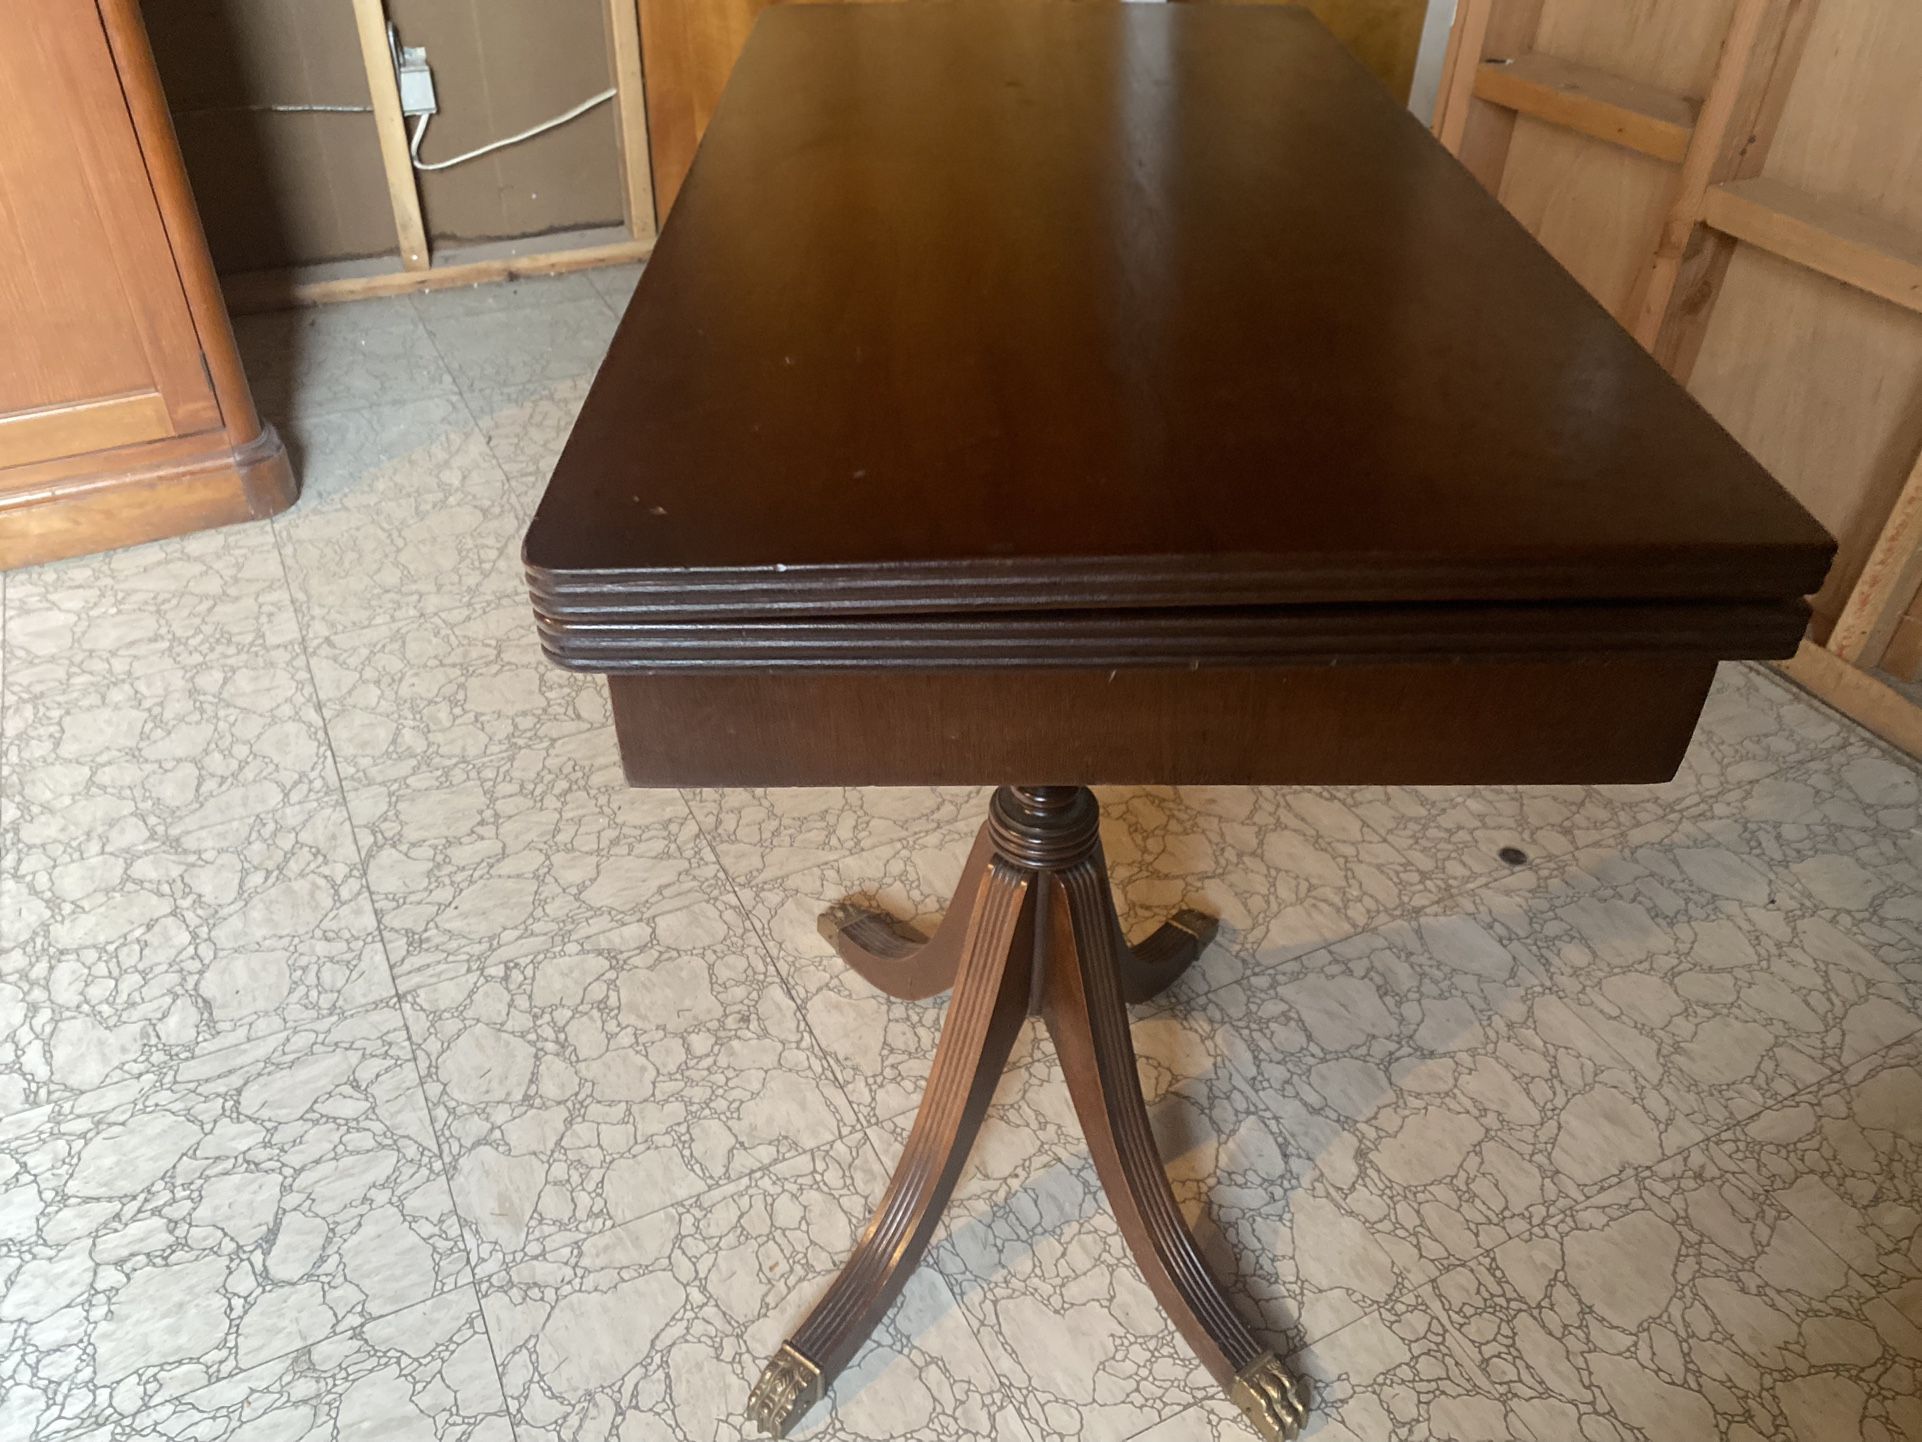  Antique Card Table With Claw Feet 